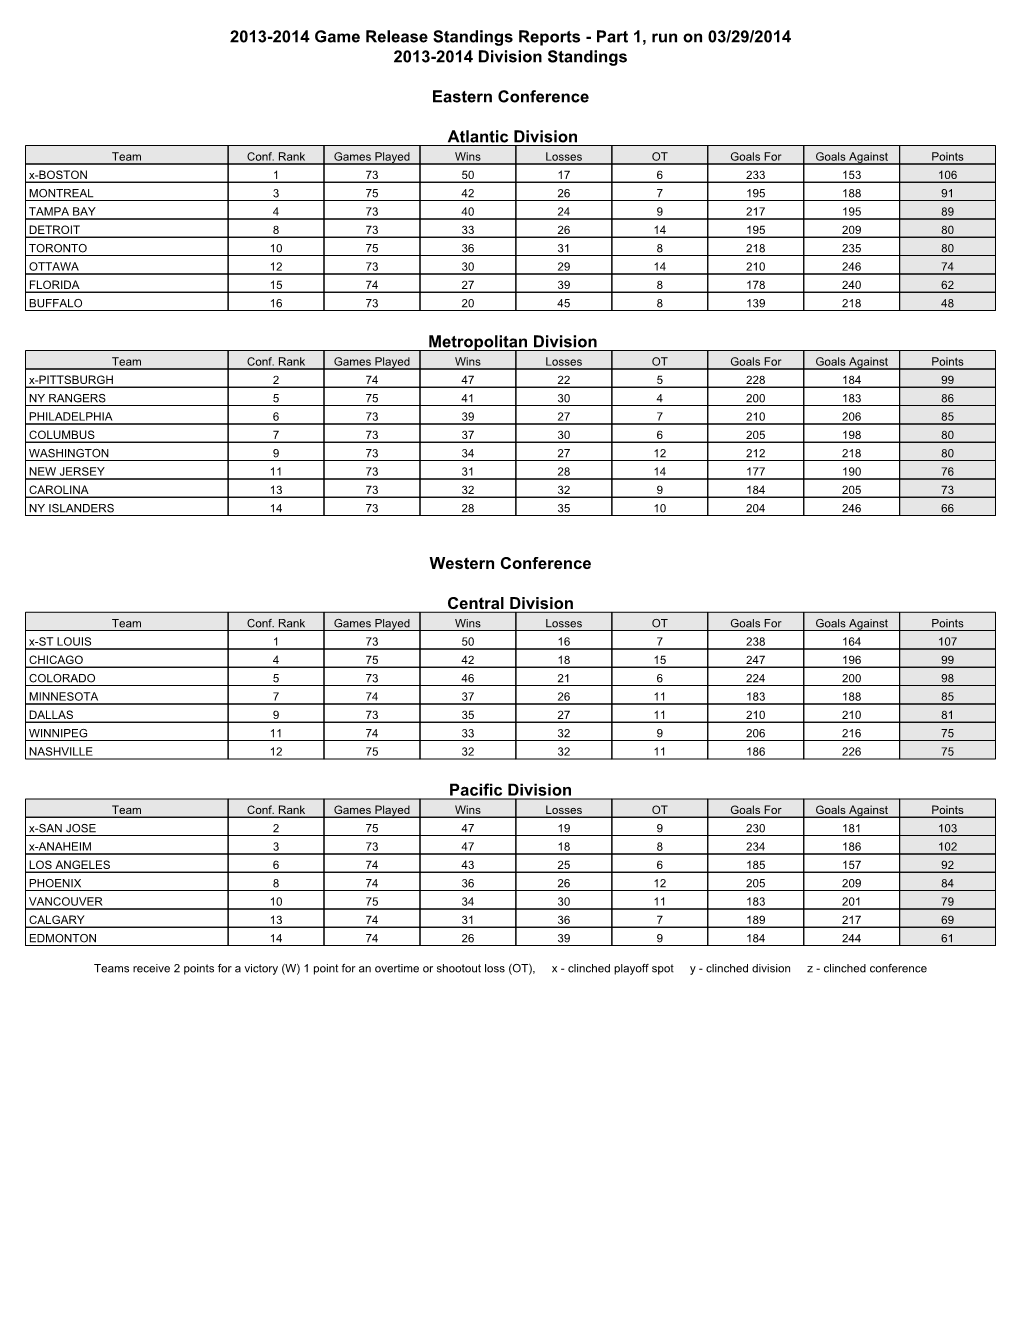 2013-2014 Game Release Standings Reports - Part 1, Run on 03/29/2014 2013-2014 Division Standings